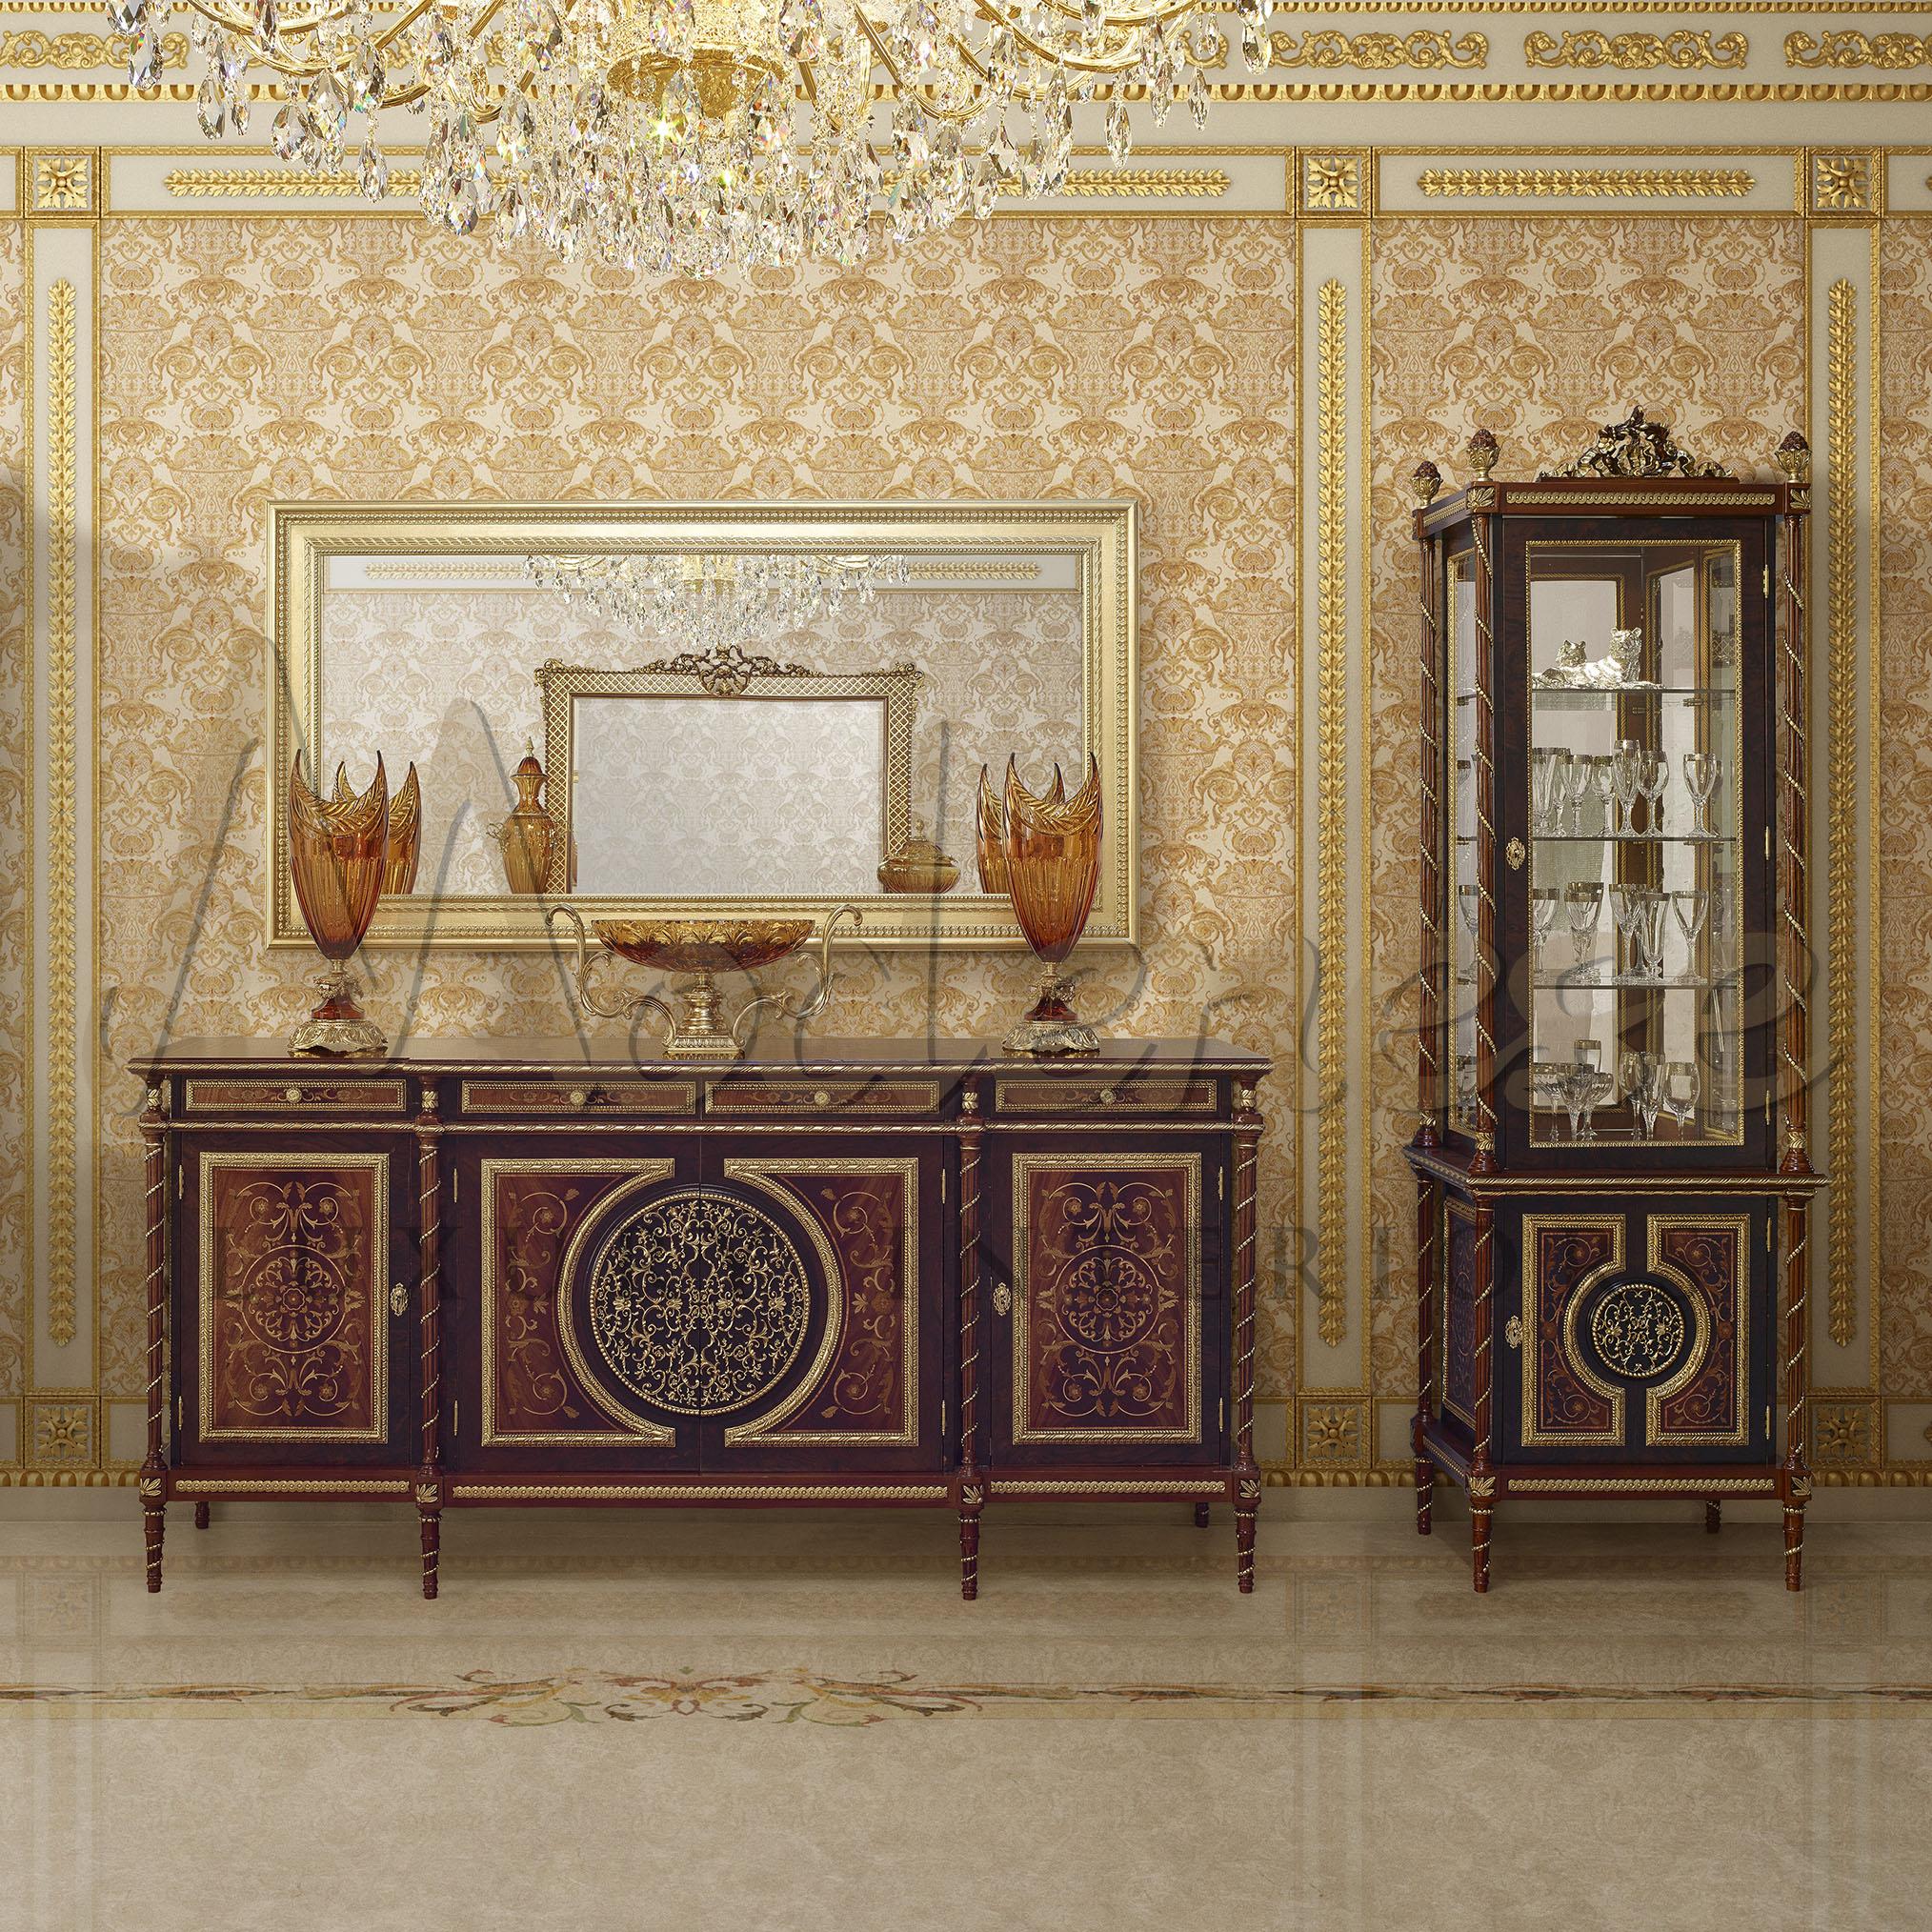 Turn your house into a lavish private residence with Modenese Gastone's Luxury furniture. Add this majestic three-sides vitrine in a revisited empire-style revival featuring precious radica inlays made from different wood types and gold leaf